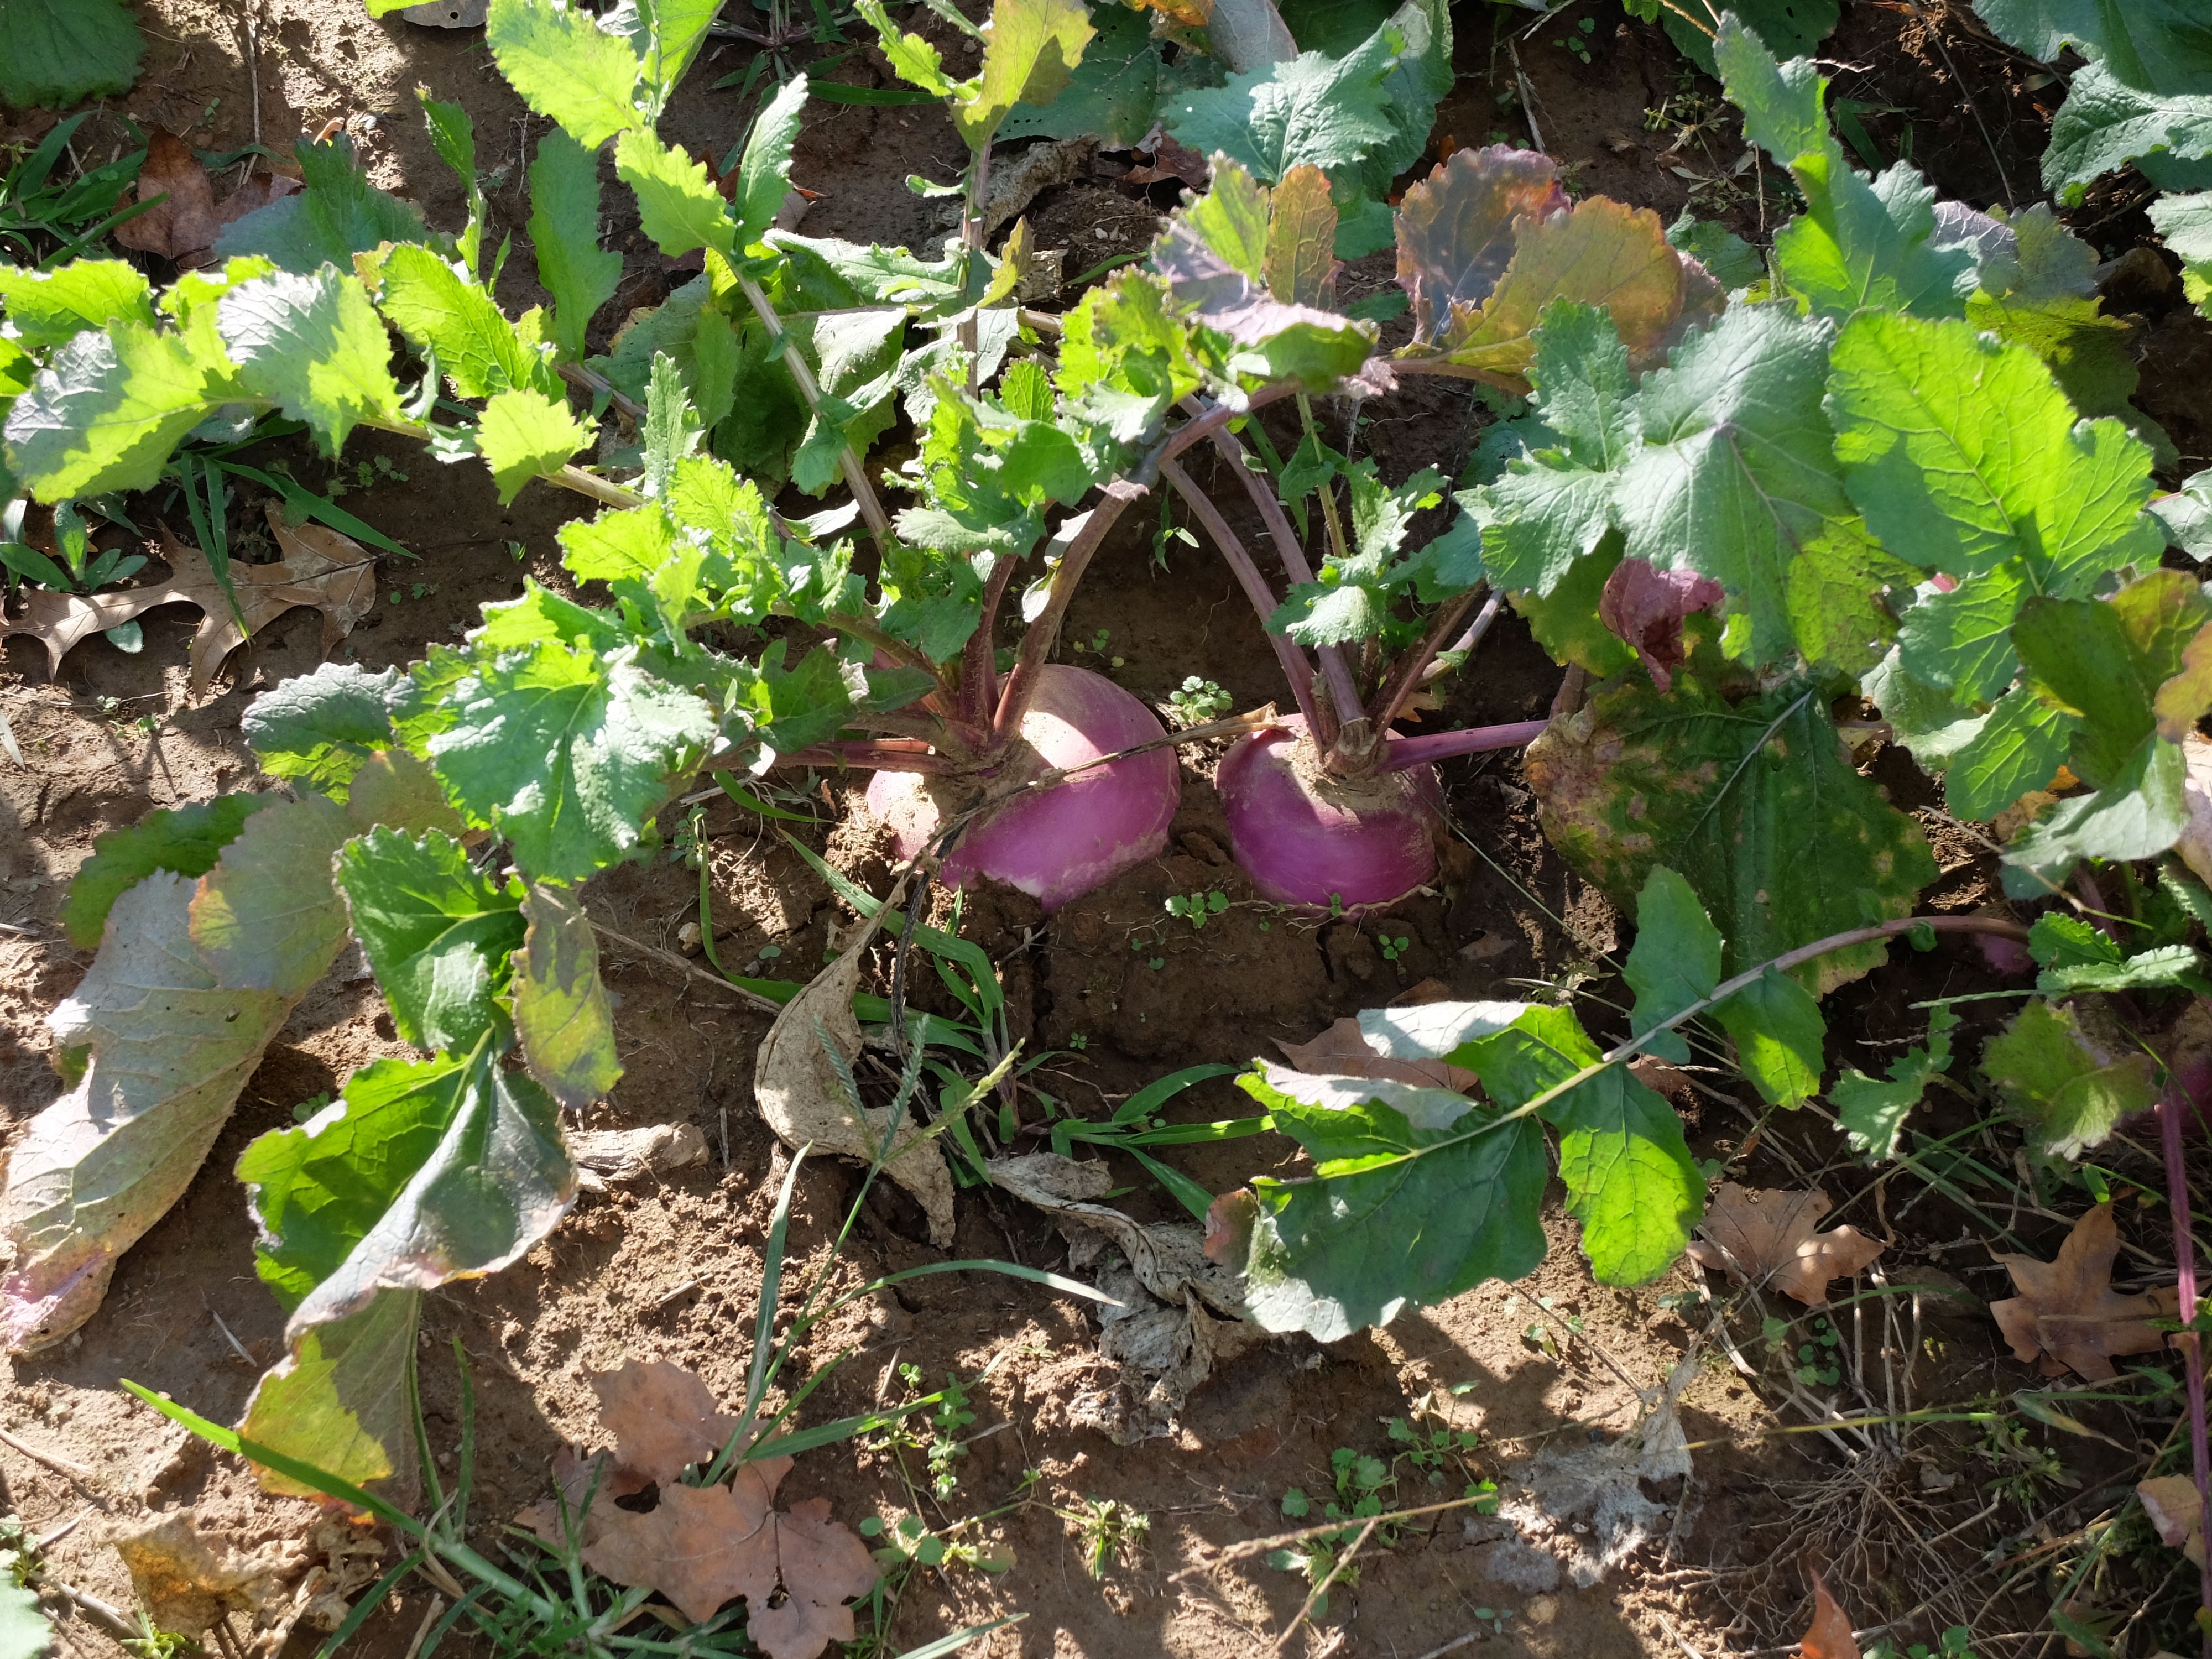 Daddy grew the prettiest turnips last fall. Hope ours are as prolific this year. 